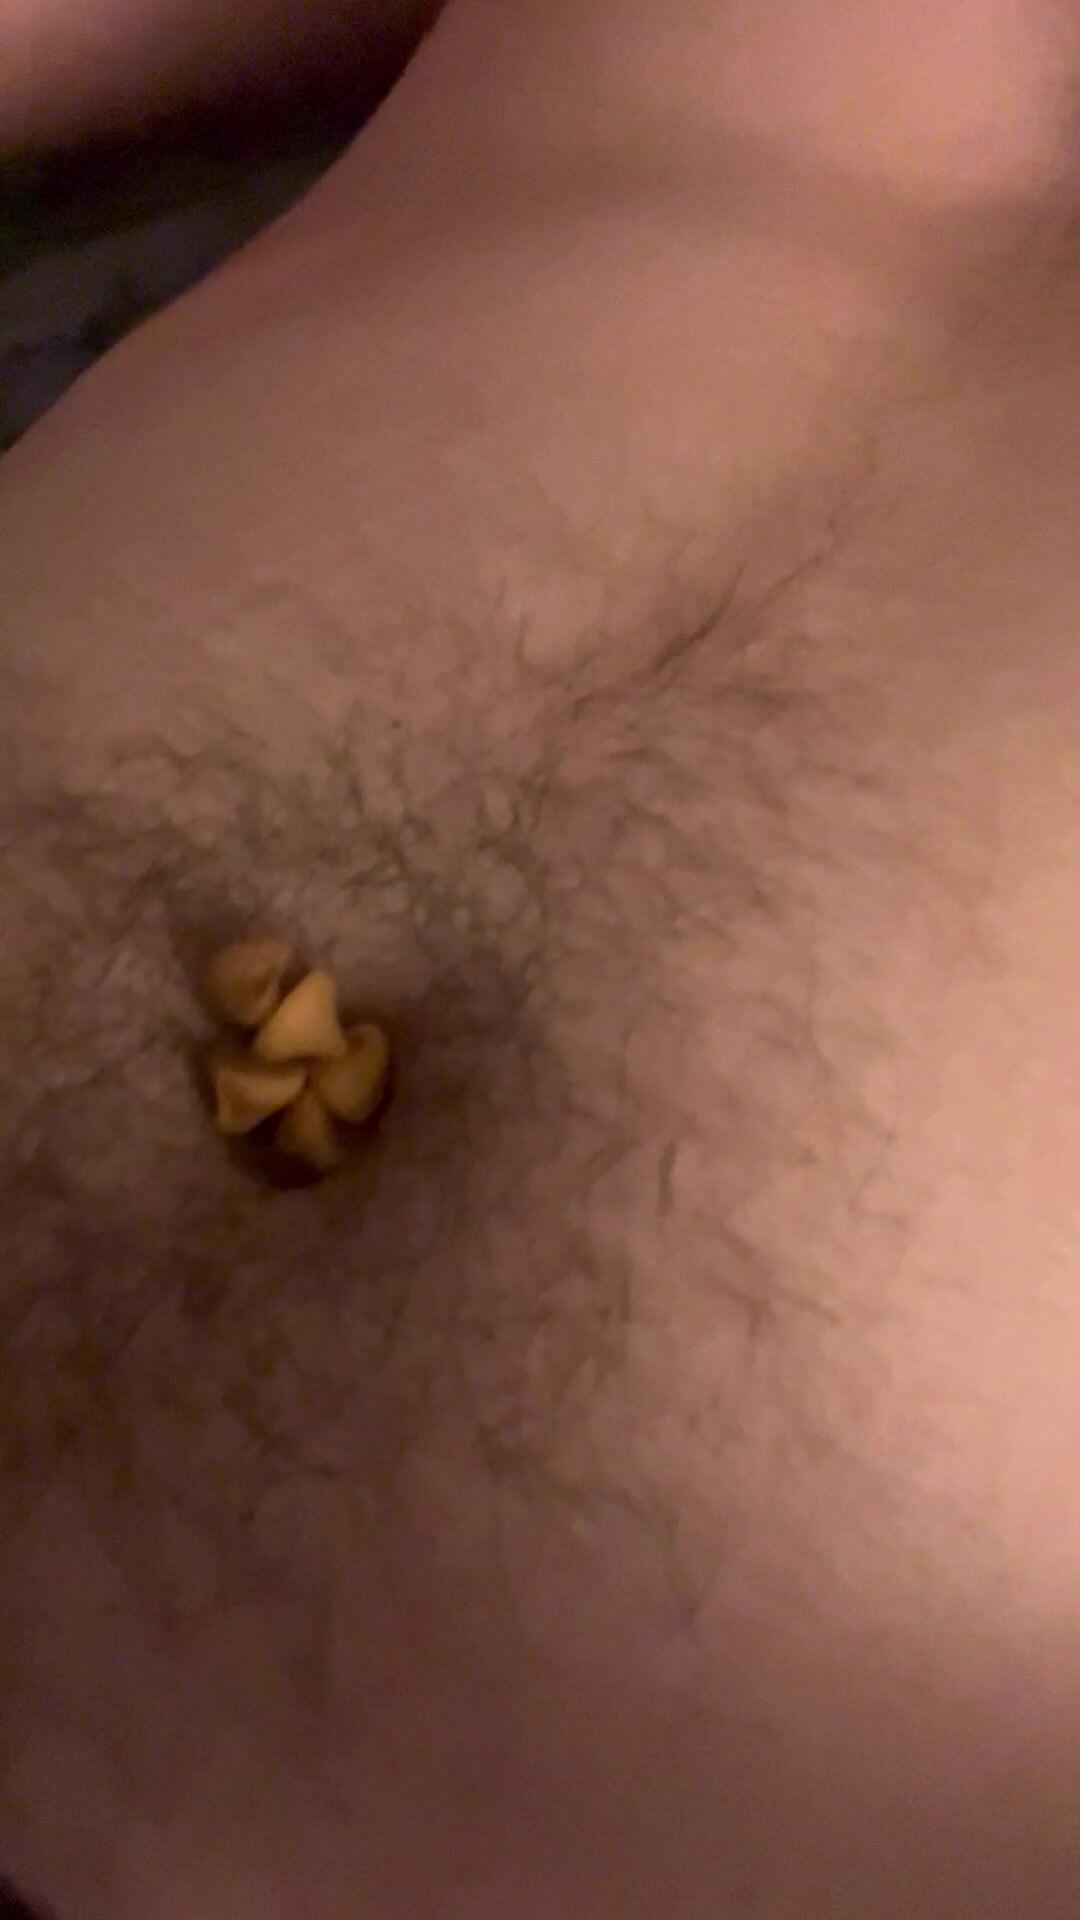 Eating Chocolate Chips out my Bellybutton